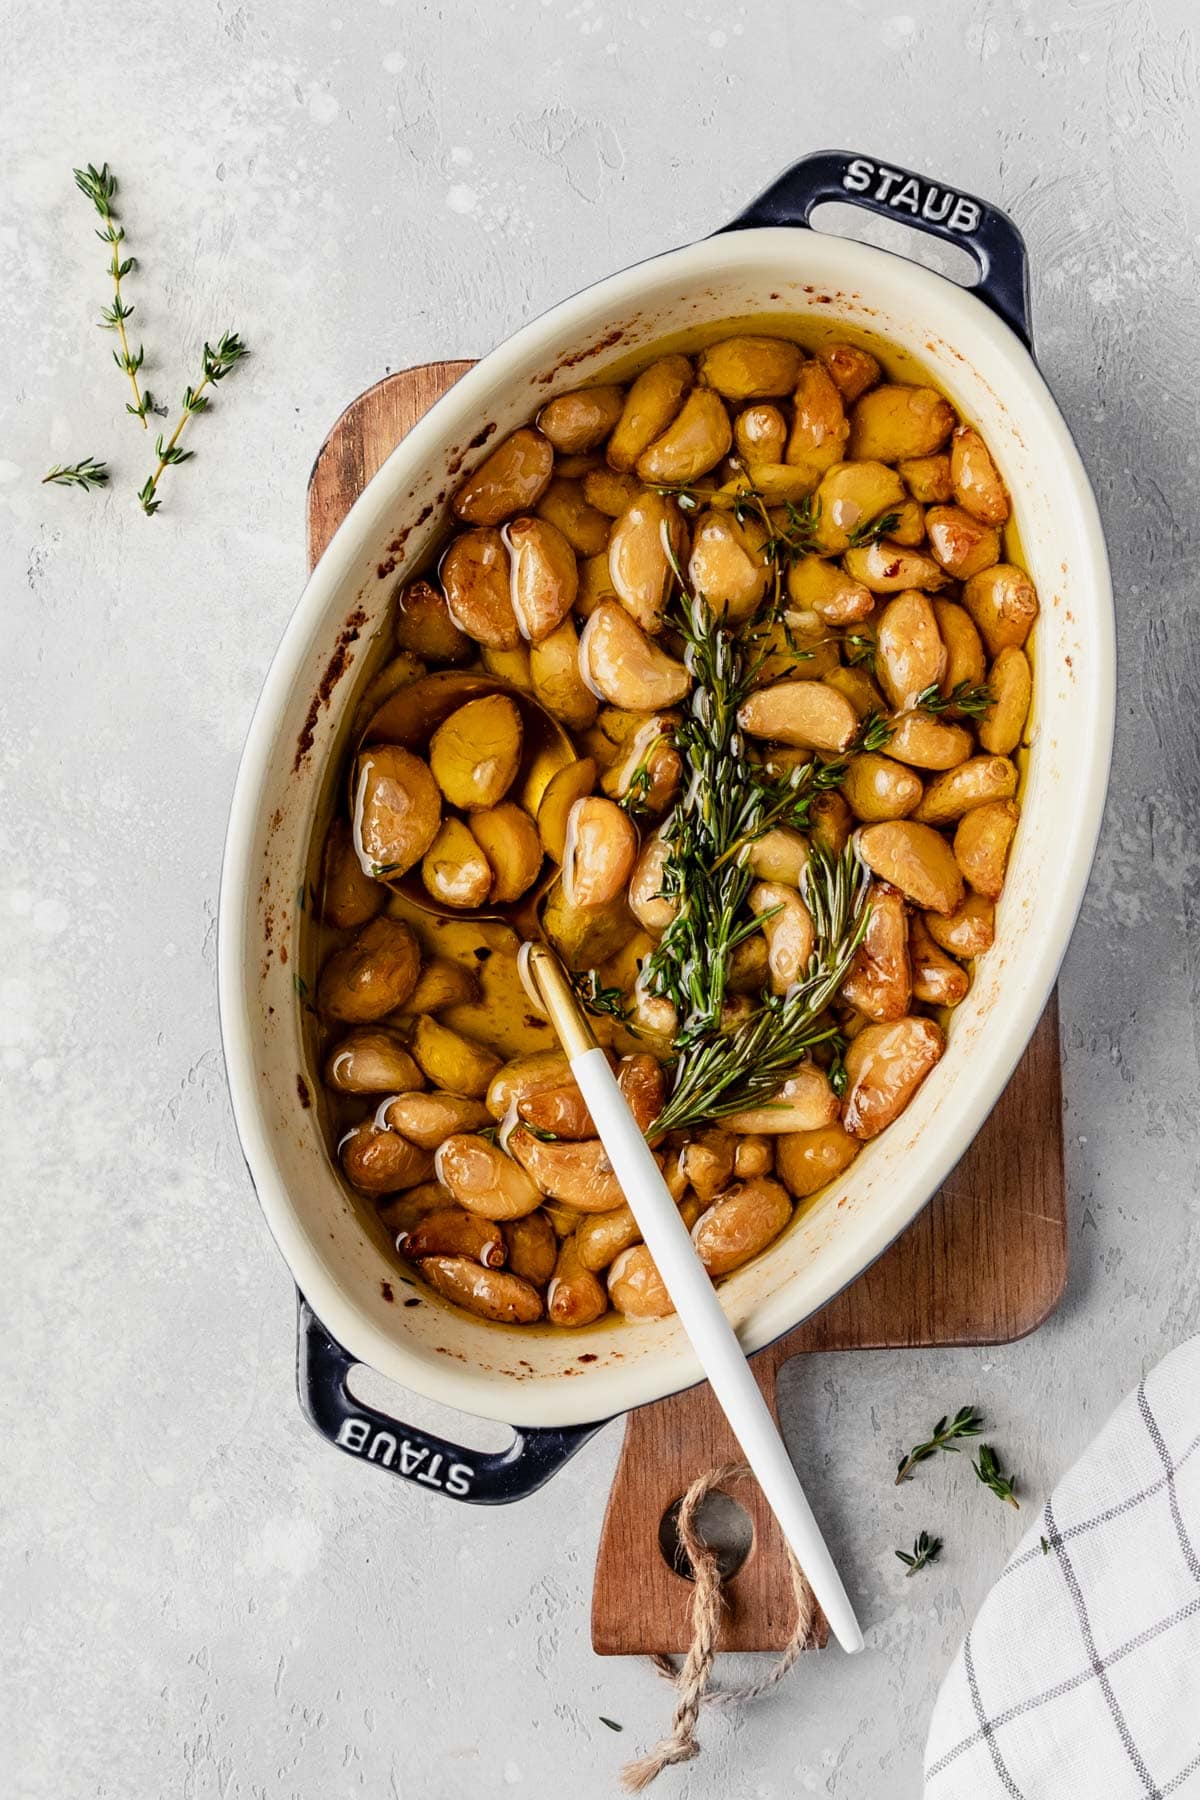 garlic confit in an oval baking dish topped with rosemary